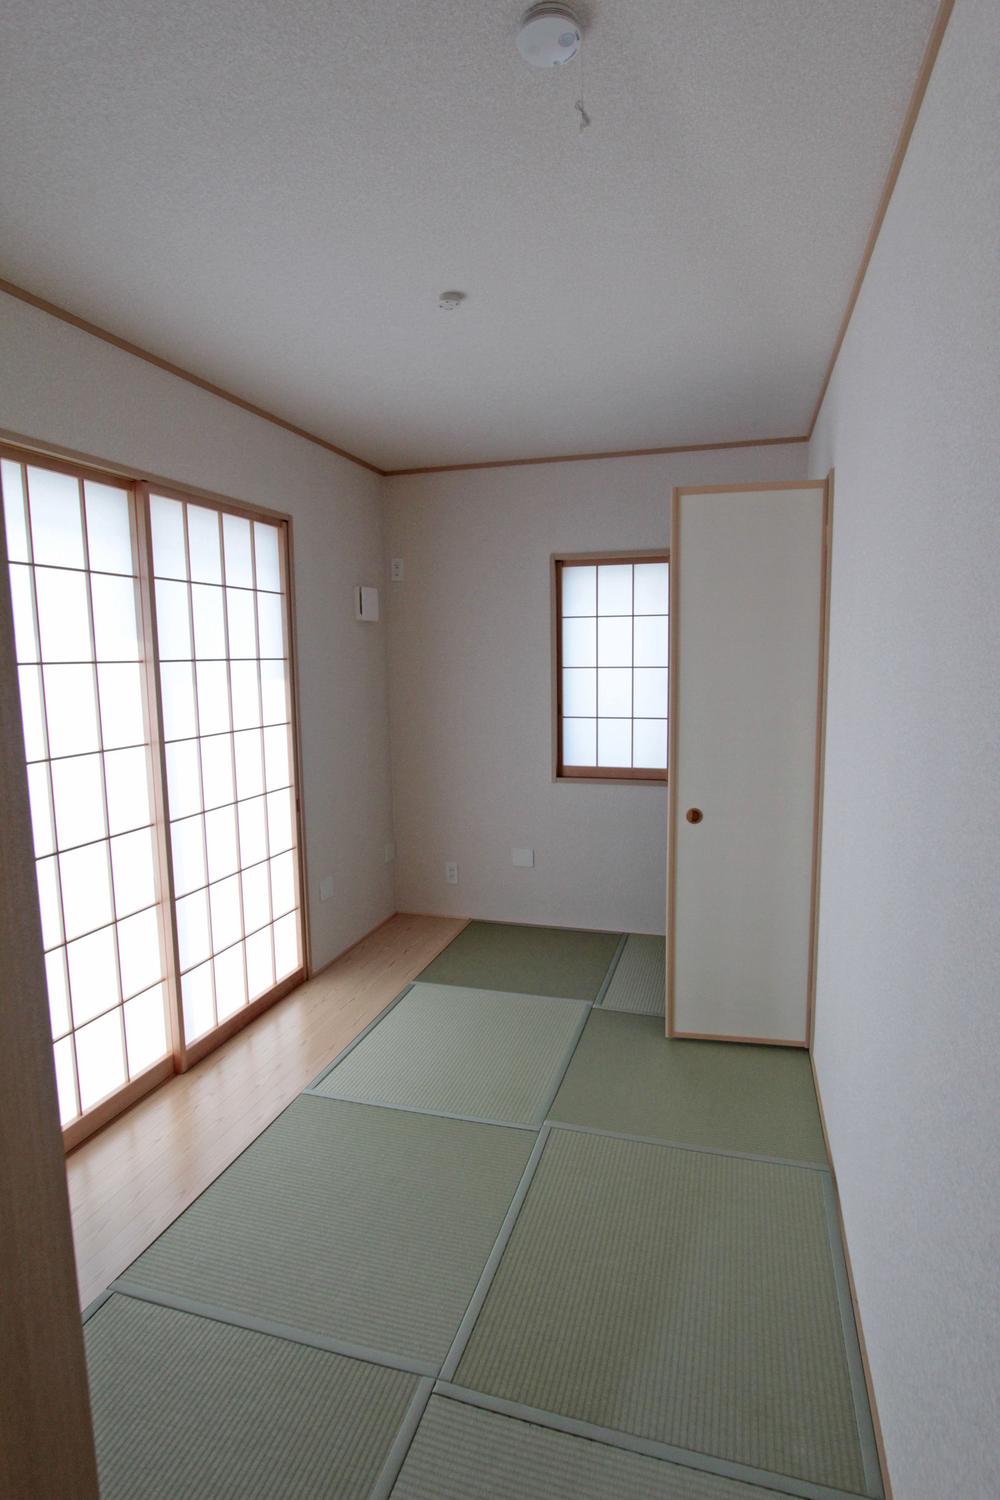 Same specifications photos (Other introspection). Interior construction results Japanese-style room